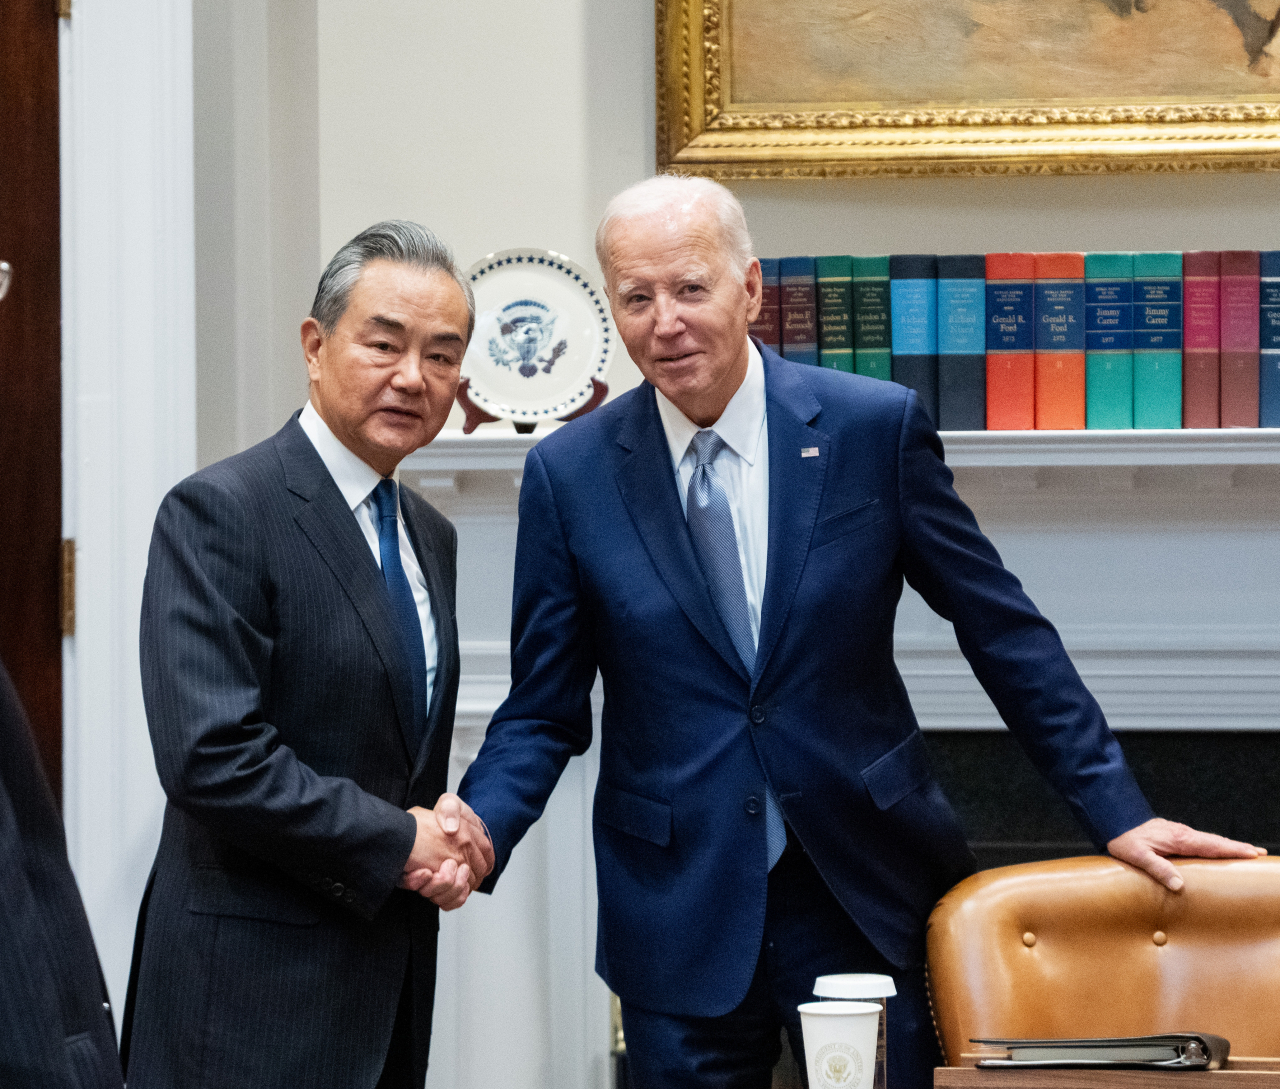 US President Joe Biden meets with Chinese foreign minister Wang Yi at the White House in Washington, D.C. on Friday. (Xinhua-Yonhap)